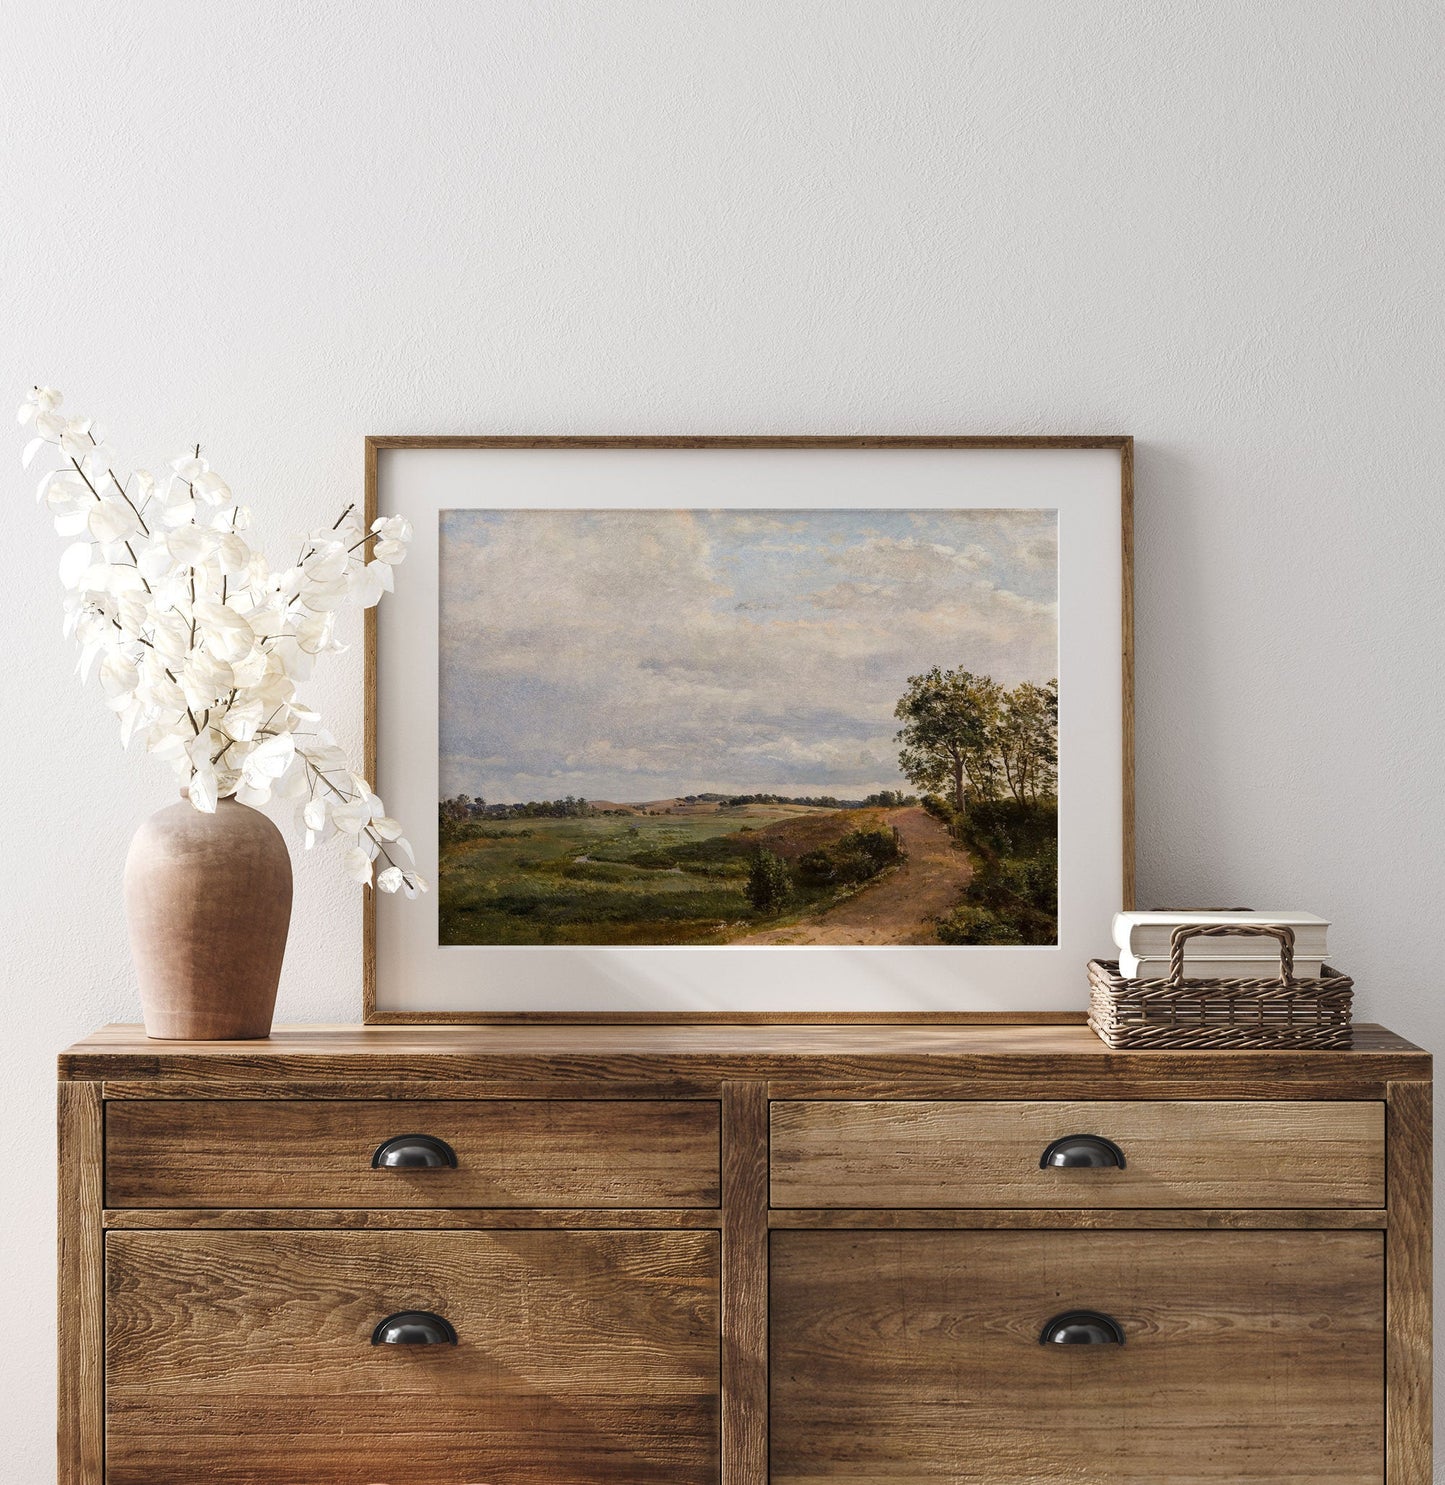 Dirt Road Landscape Vintage Artwork - Old Painting Farmhouse Kitchen Living Room Decor Picture - Printed and Shipped Reproduction